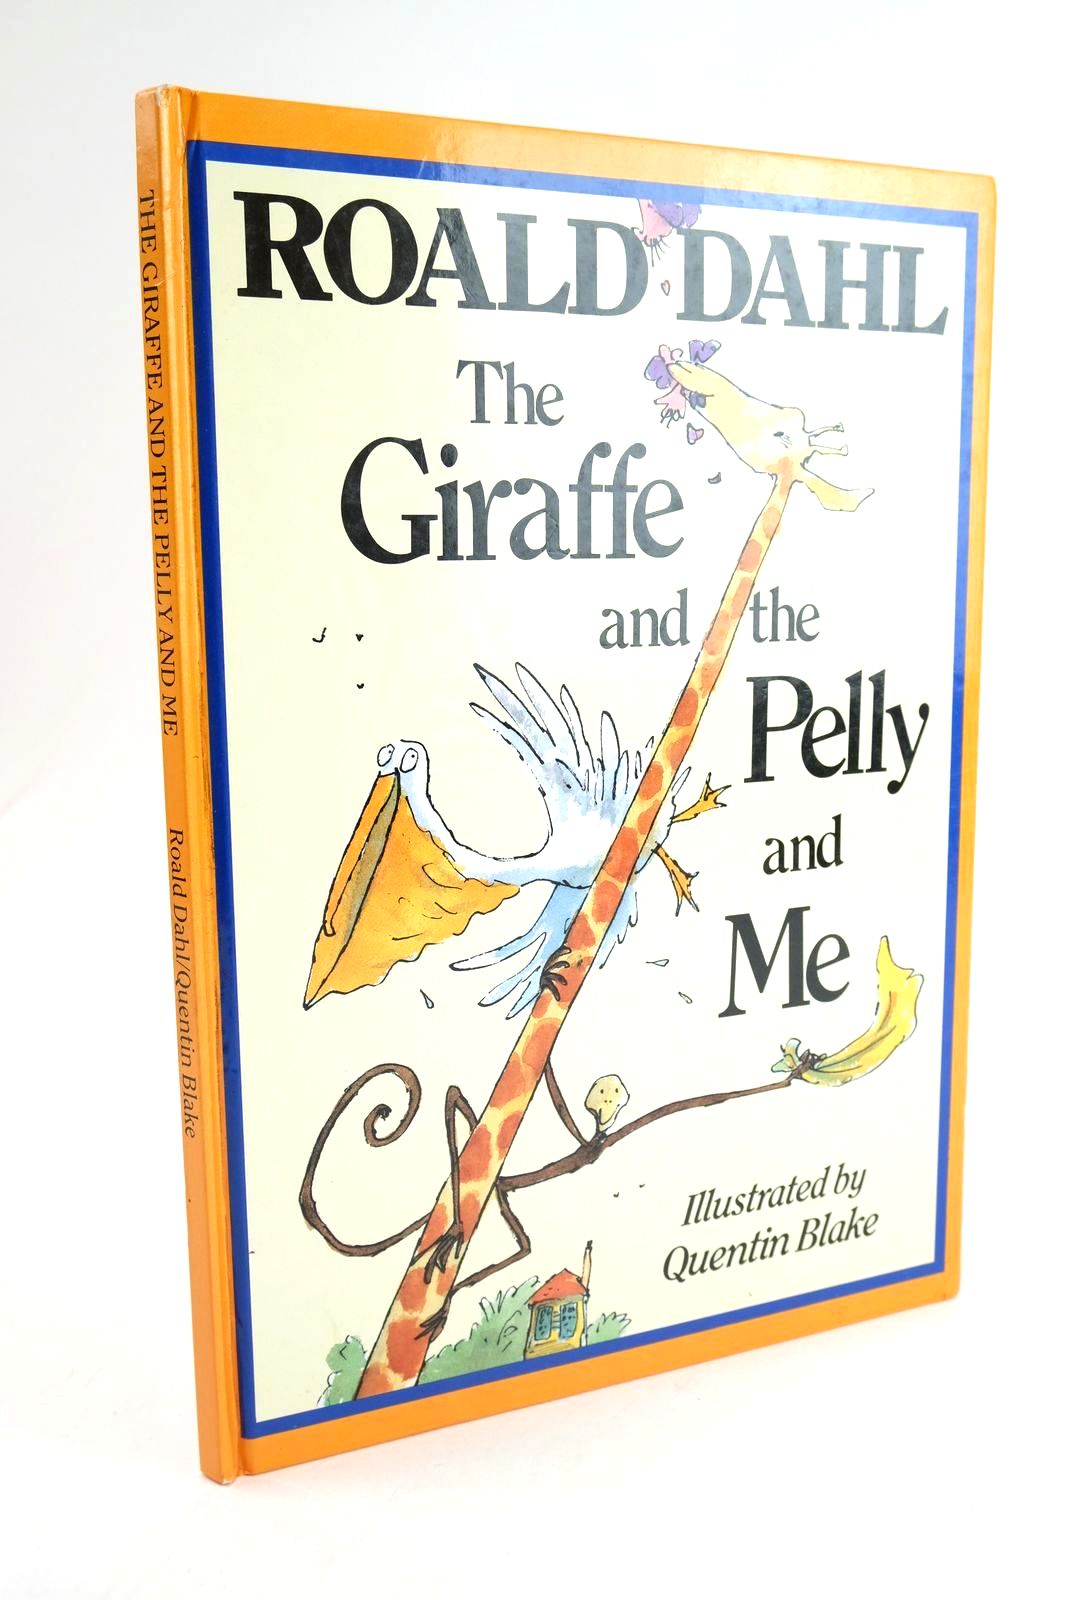 Photo of THE GIRAFFE AND THE PELLY AND ME written by Dahl, Roald illustrated by Blake, Quentin published by Jonathan Cape (STOCK CODE: 1324638)  for sale by Stella & Rose's Books